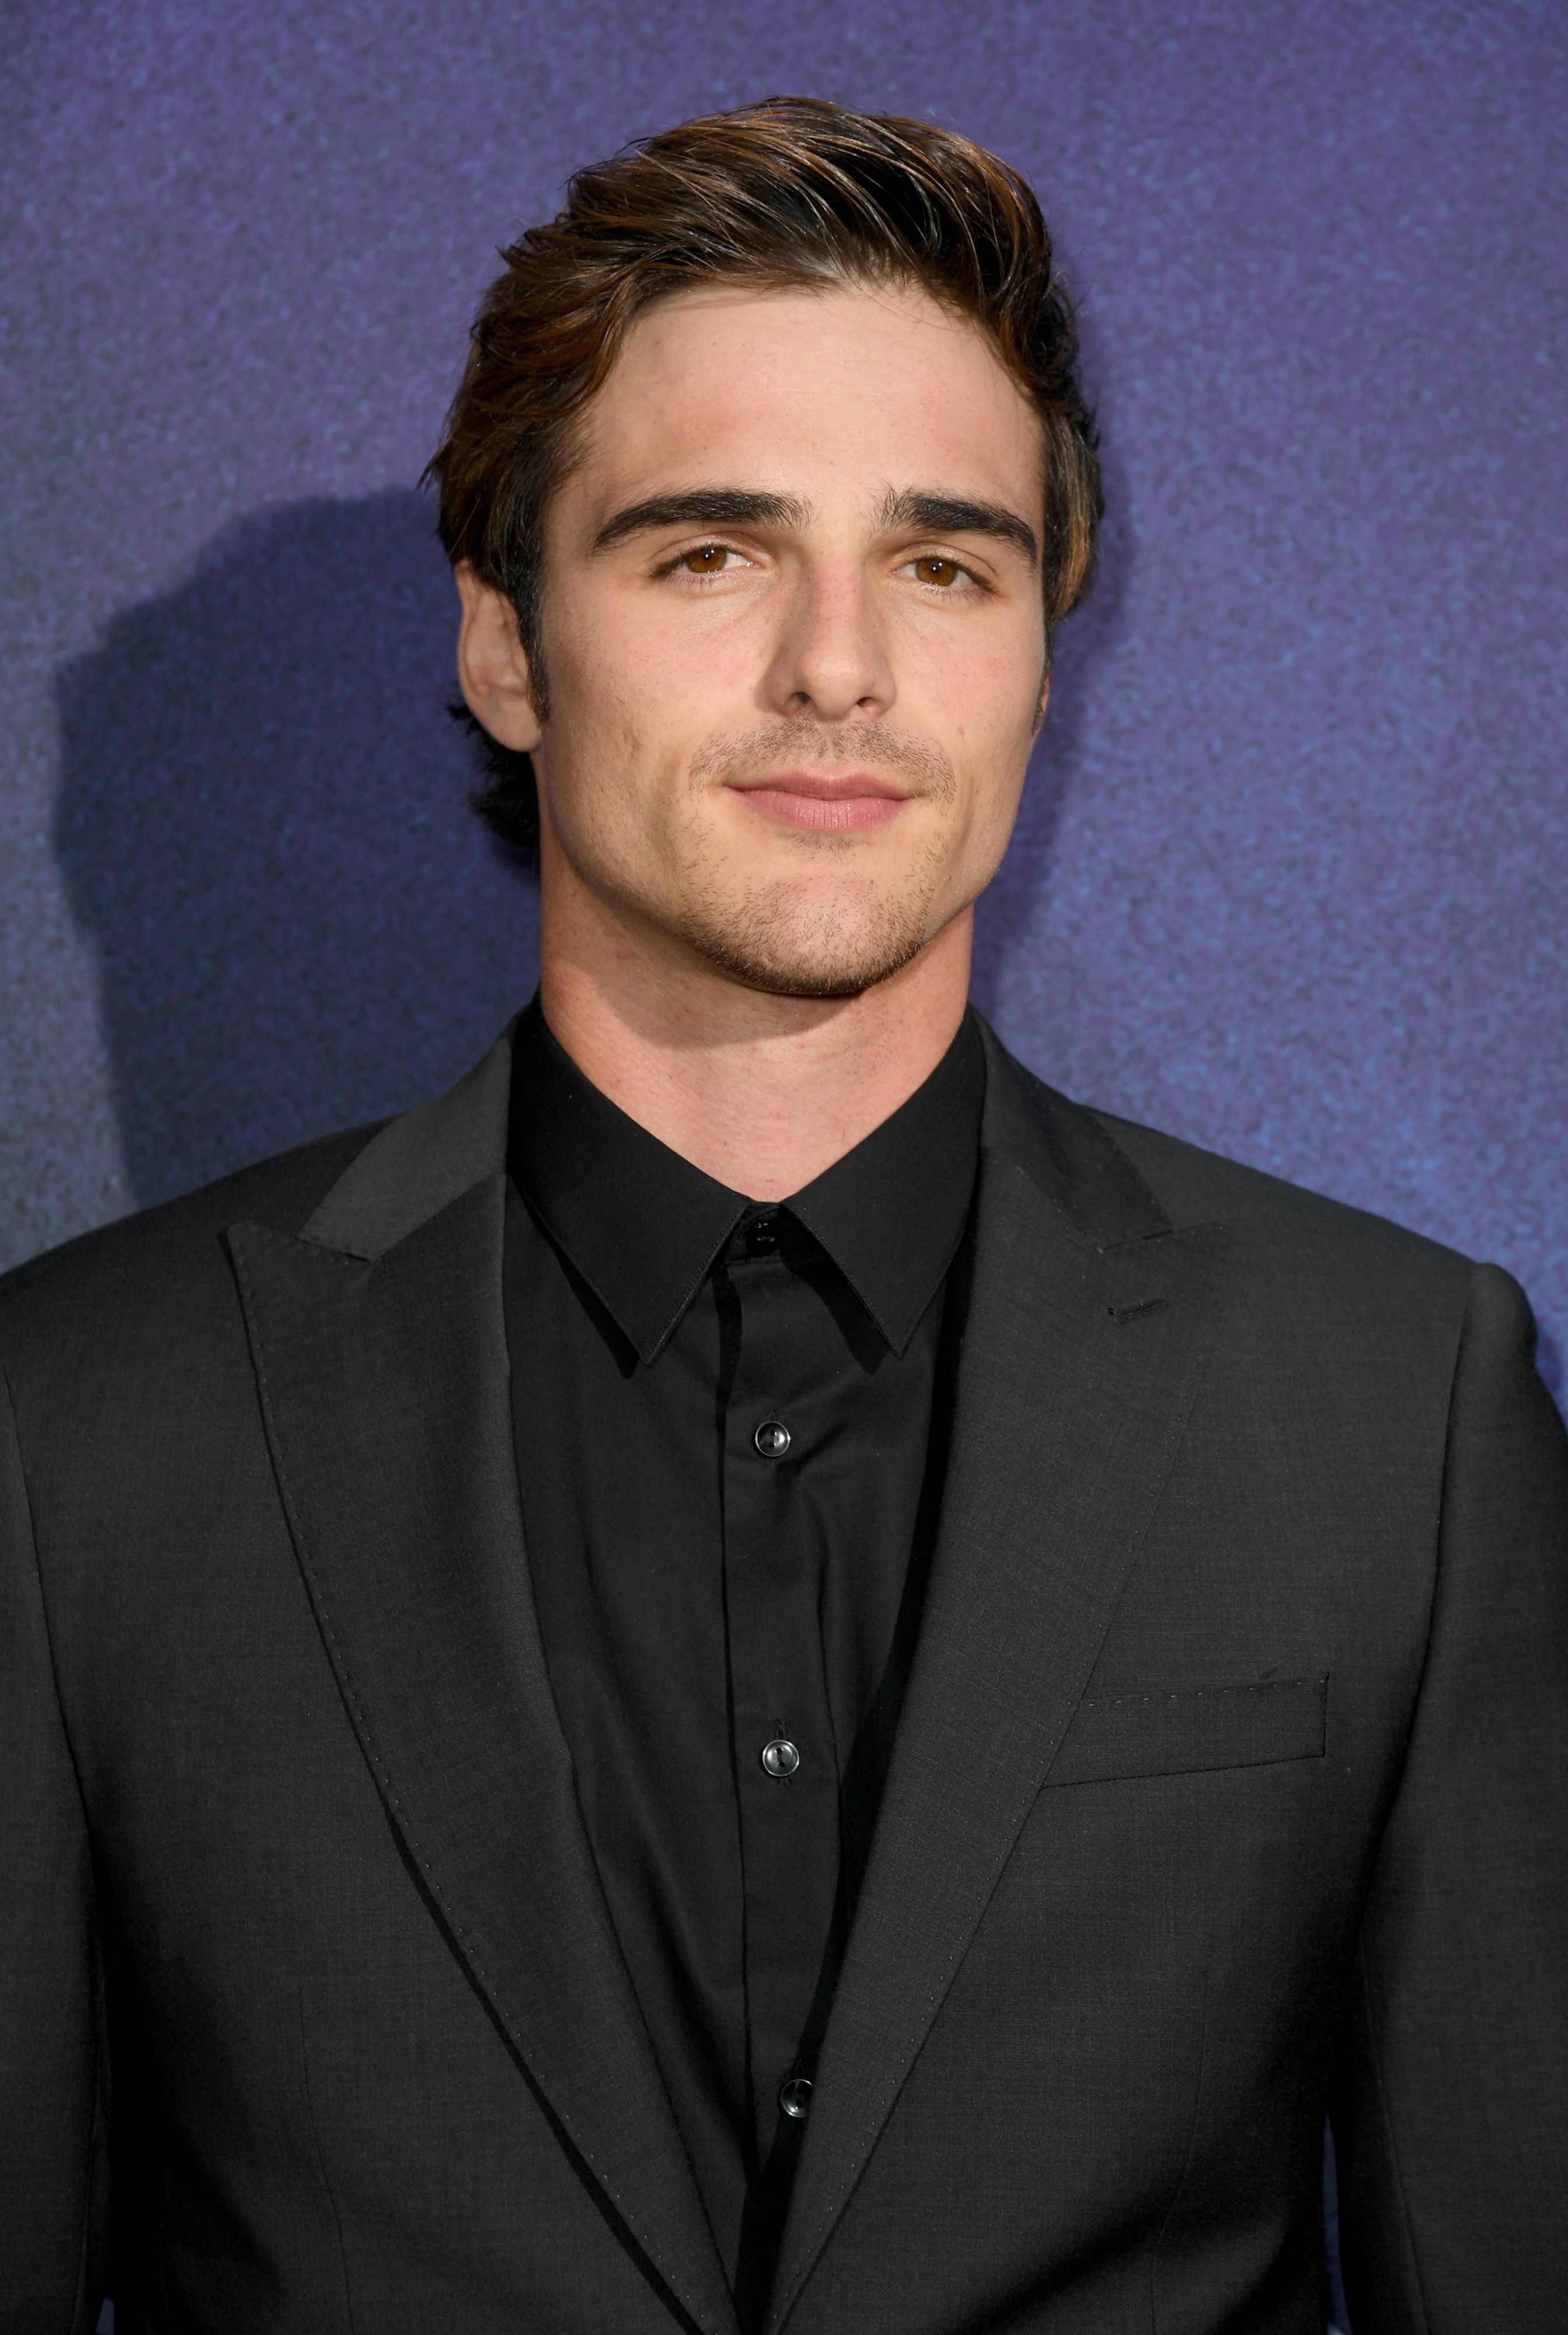 Fans Think Jacob Elordi Looks Miserable In The Kissing Booth 2